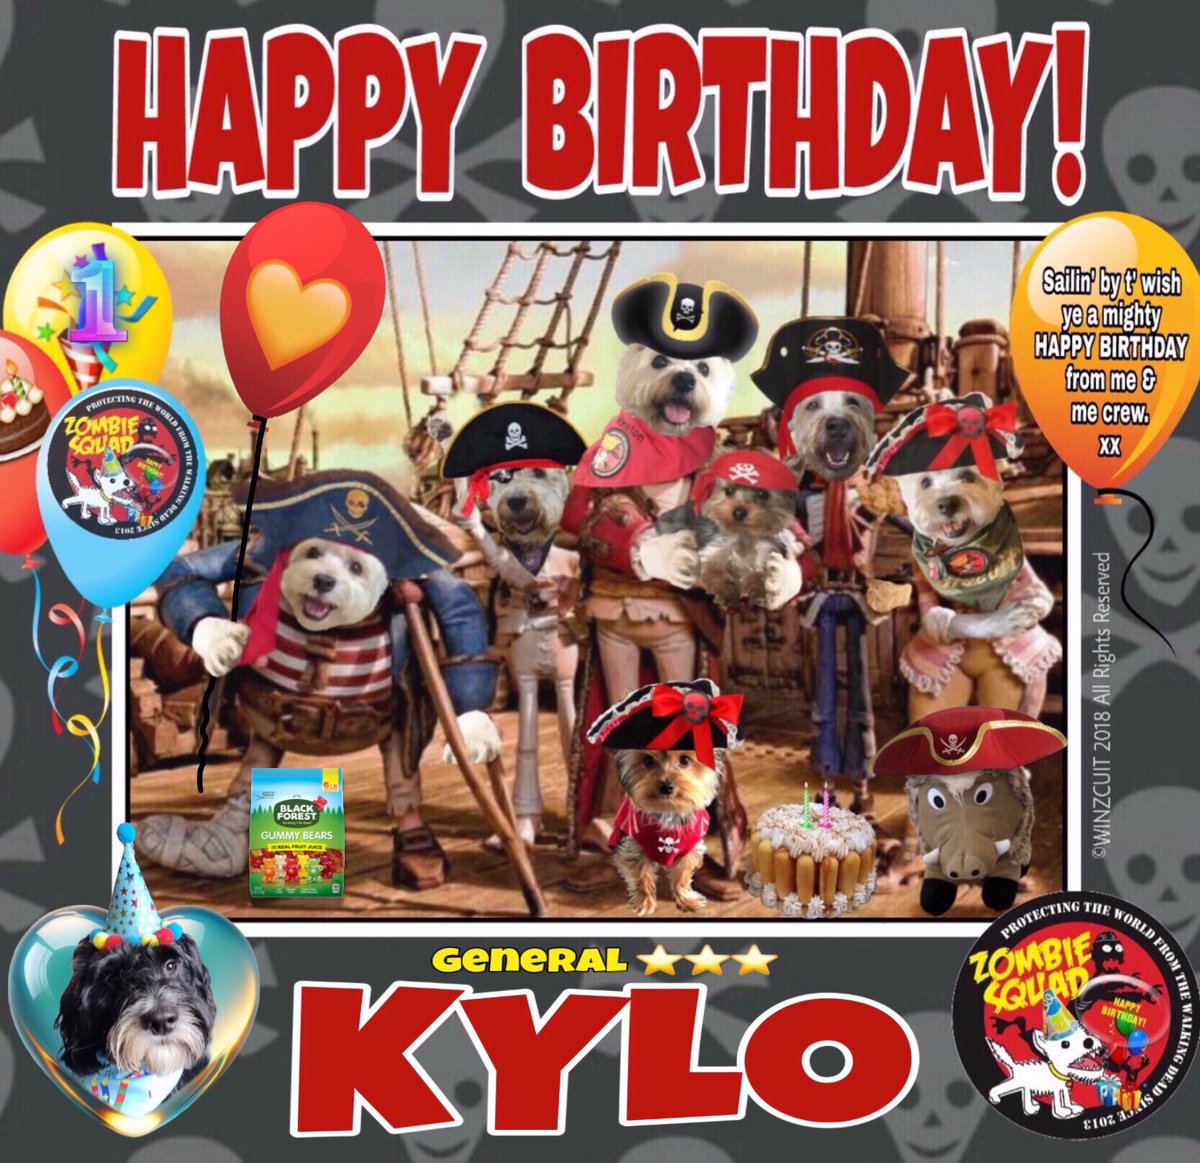 🎂Wishing a 🎁HAPPY 1st BIRTHDAY🥳 to our pawtastic pal, GENERAL KYLO @Sprocket_Cool from Leada Billy & all of your ZombieSquad pals. We hope your special day is full of tasty treats, belly rubs, gummy bears & cayke, dear pal. RaaAAA!!